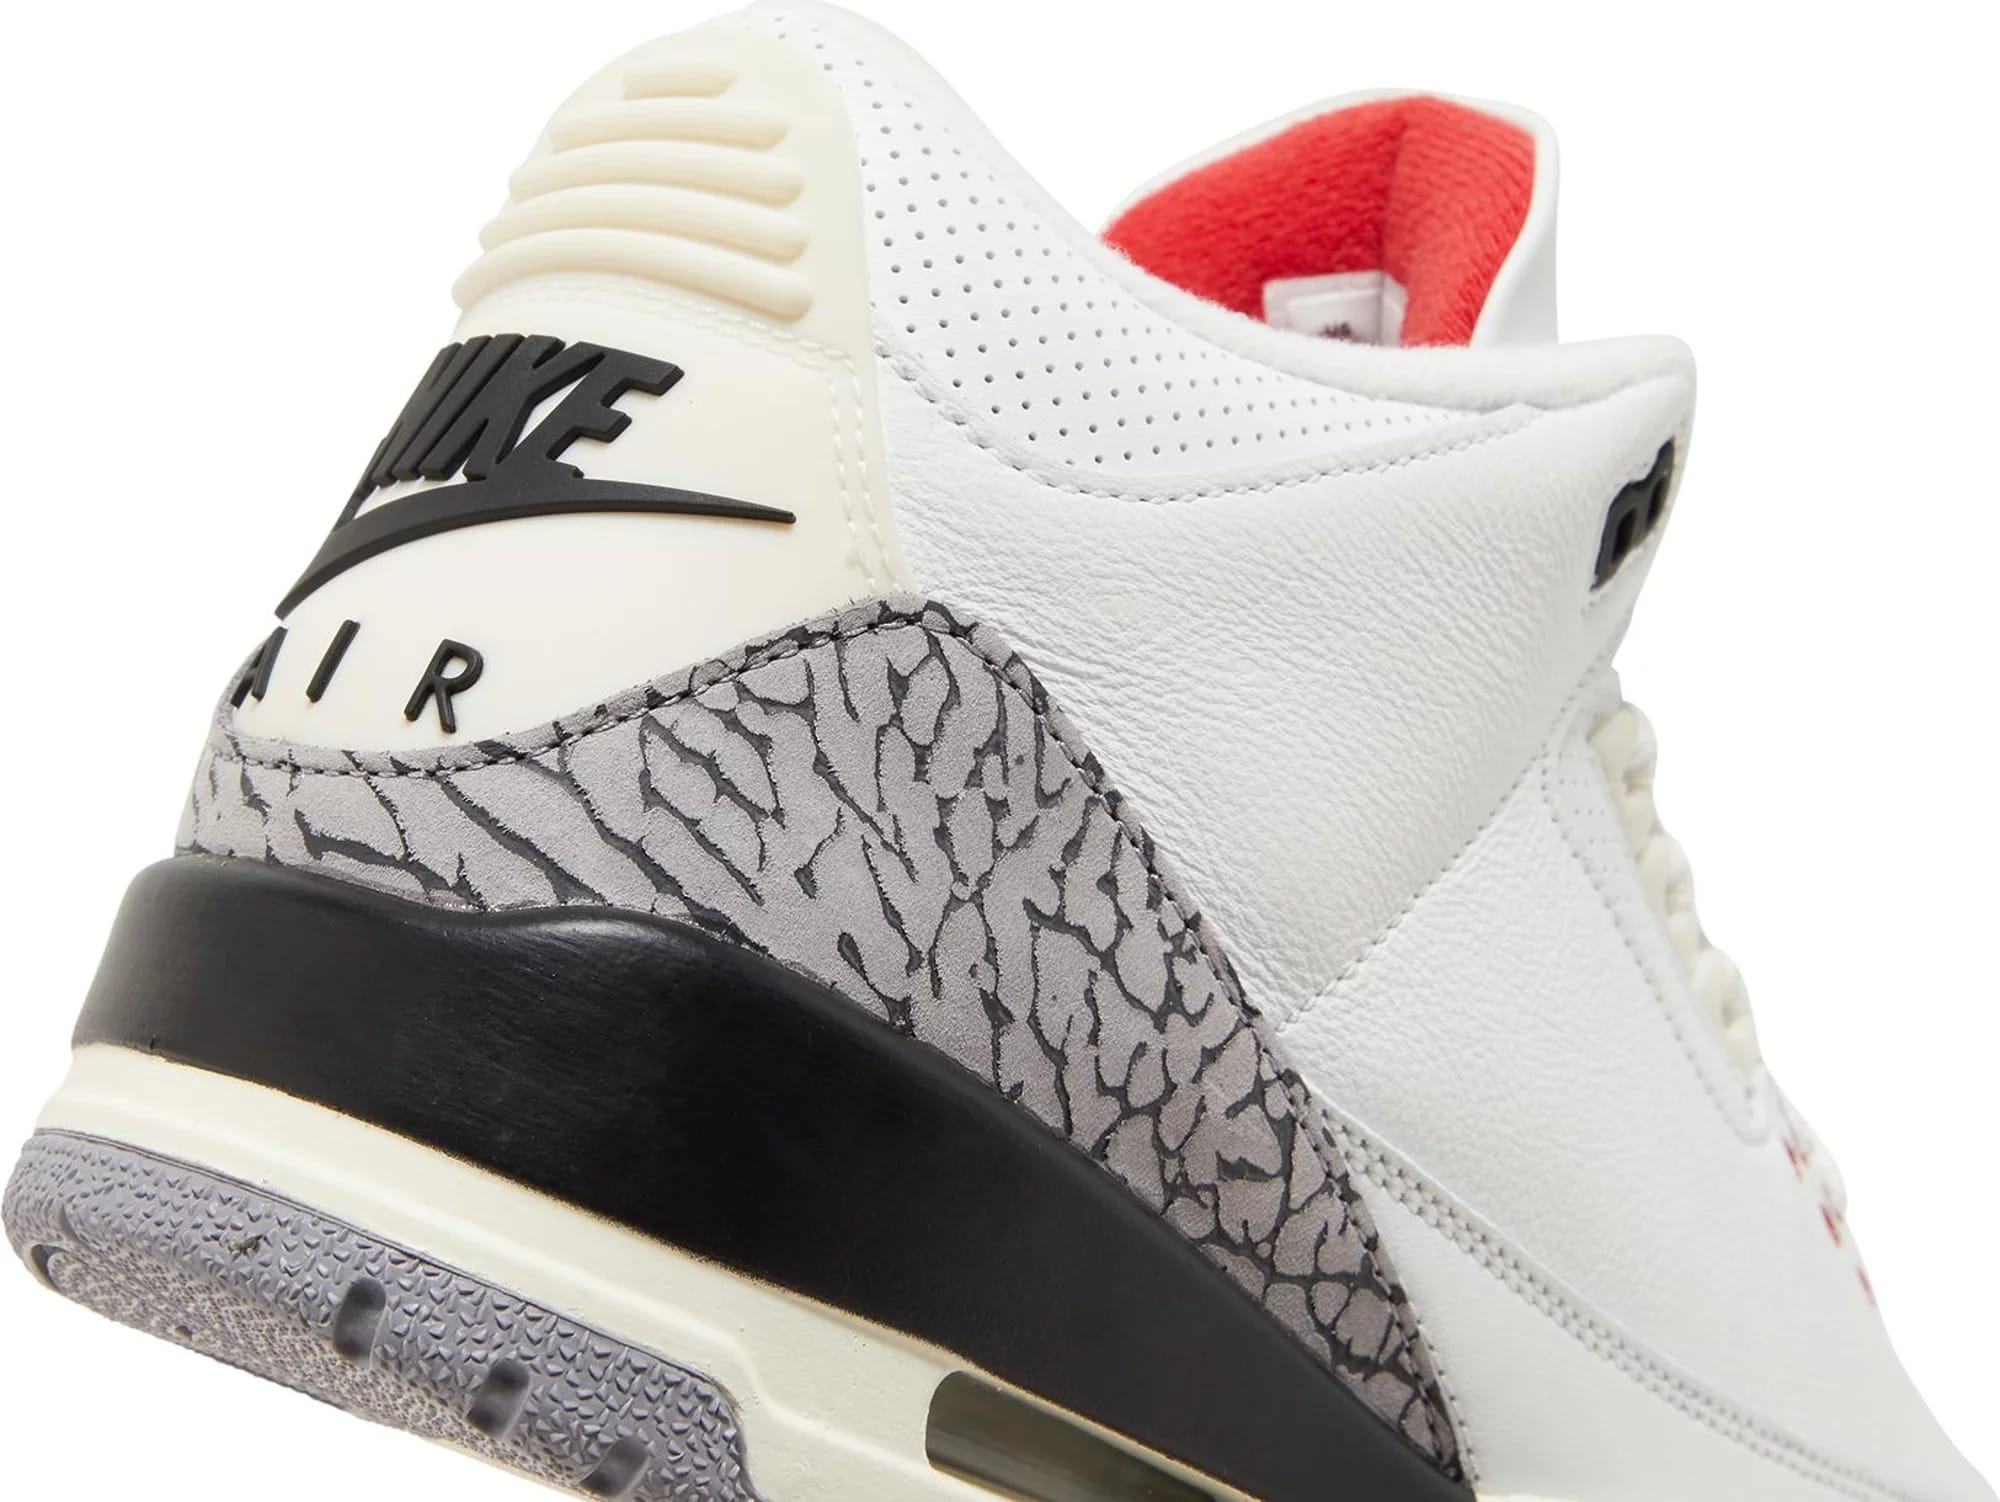 Air Jordan 3 III White Cement Reimagined 2023 Release Date DN3707-100 | Sole Collector